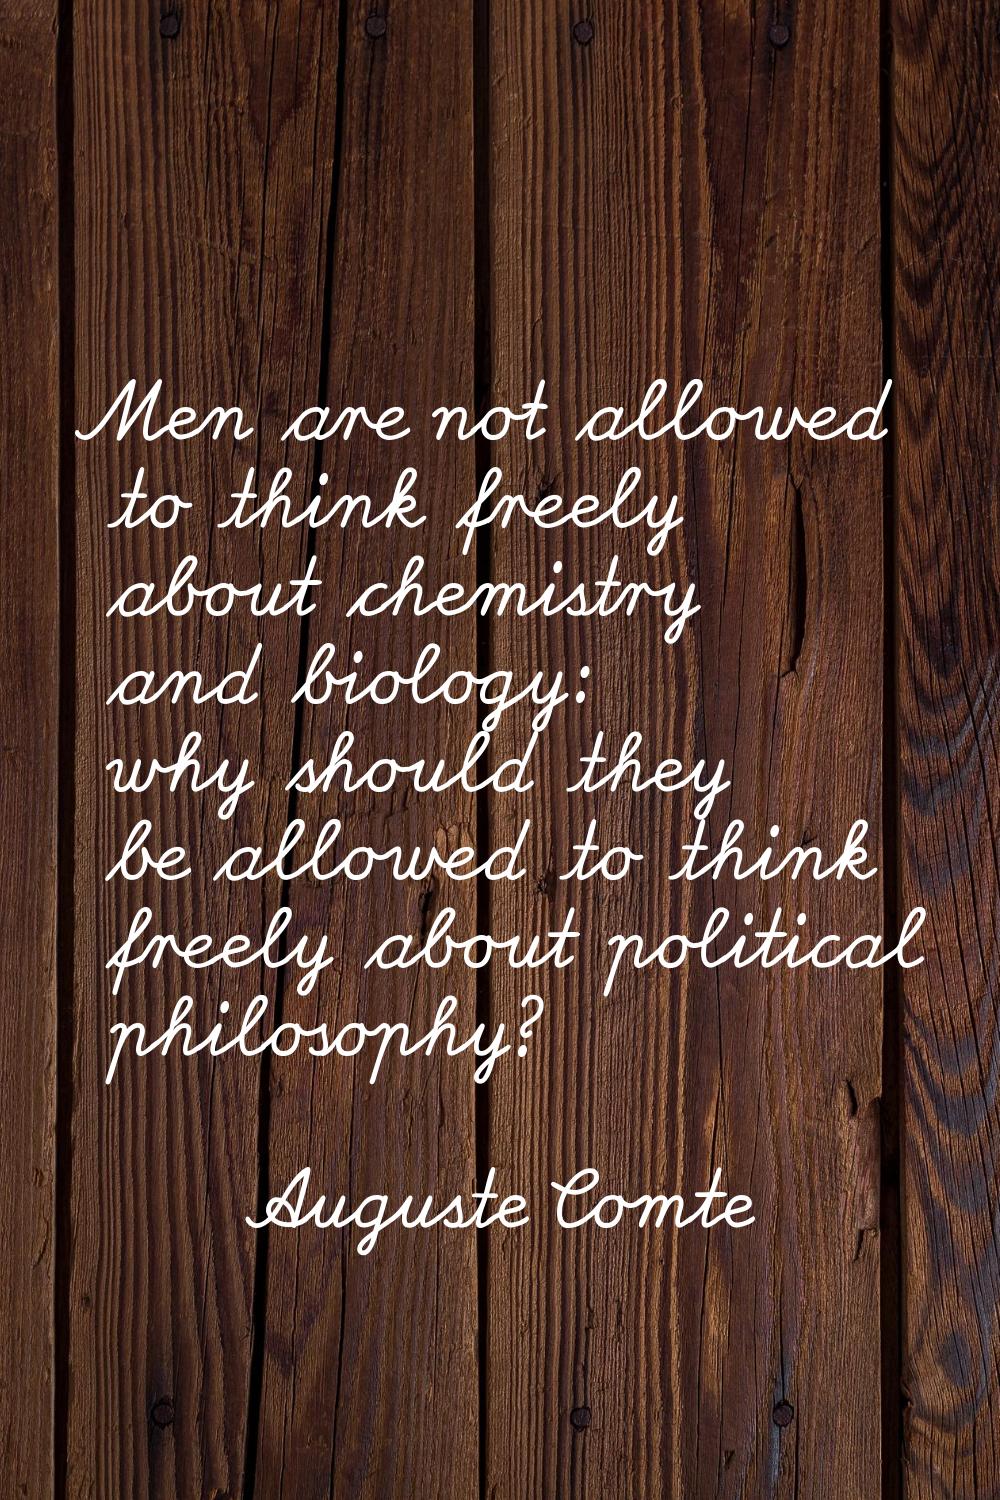 Men are not allowed to think freely about chemistry and biology: why should they be allowed to thin